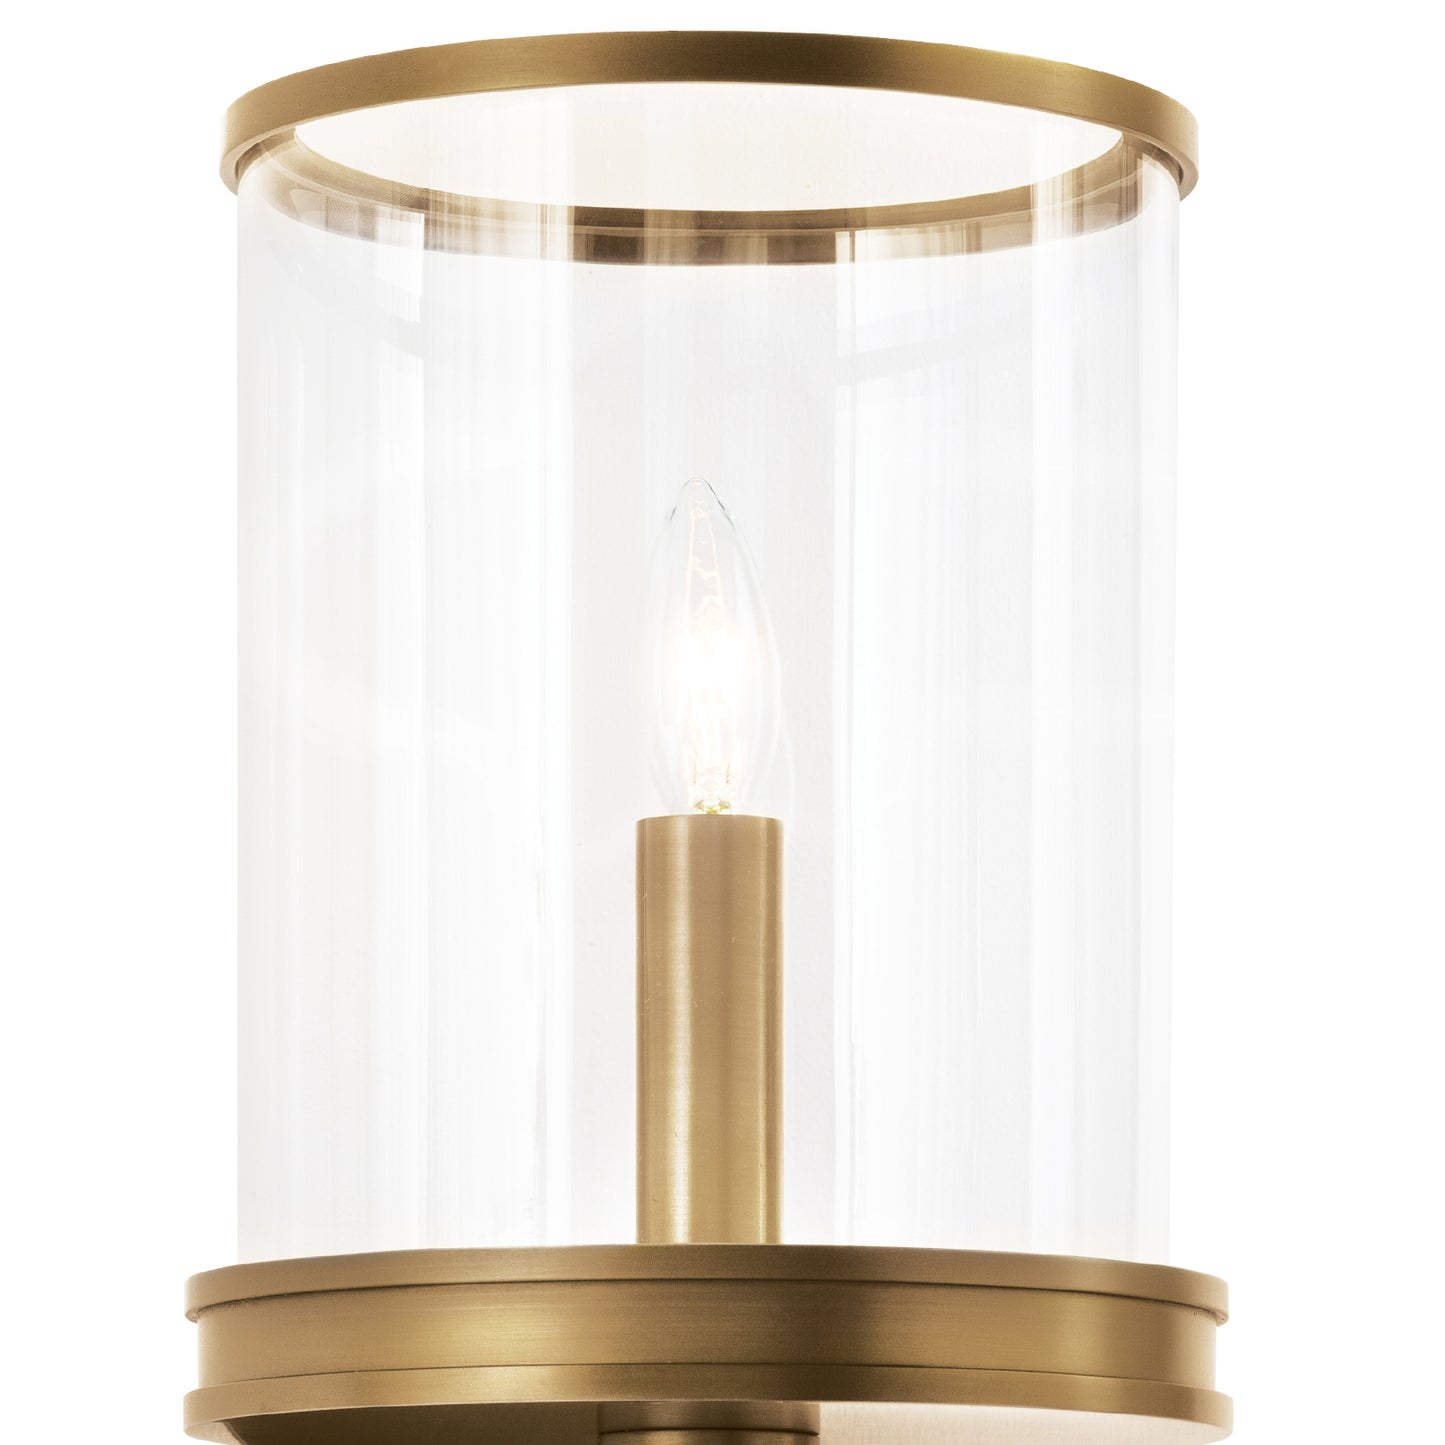 Adria Sconce in Natural Brass by Southern Living